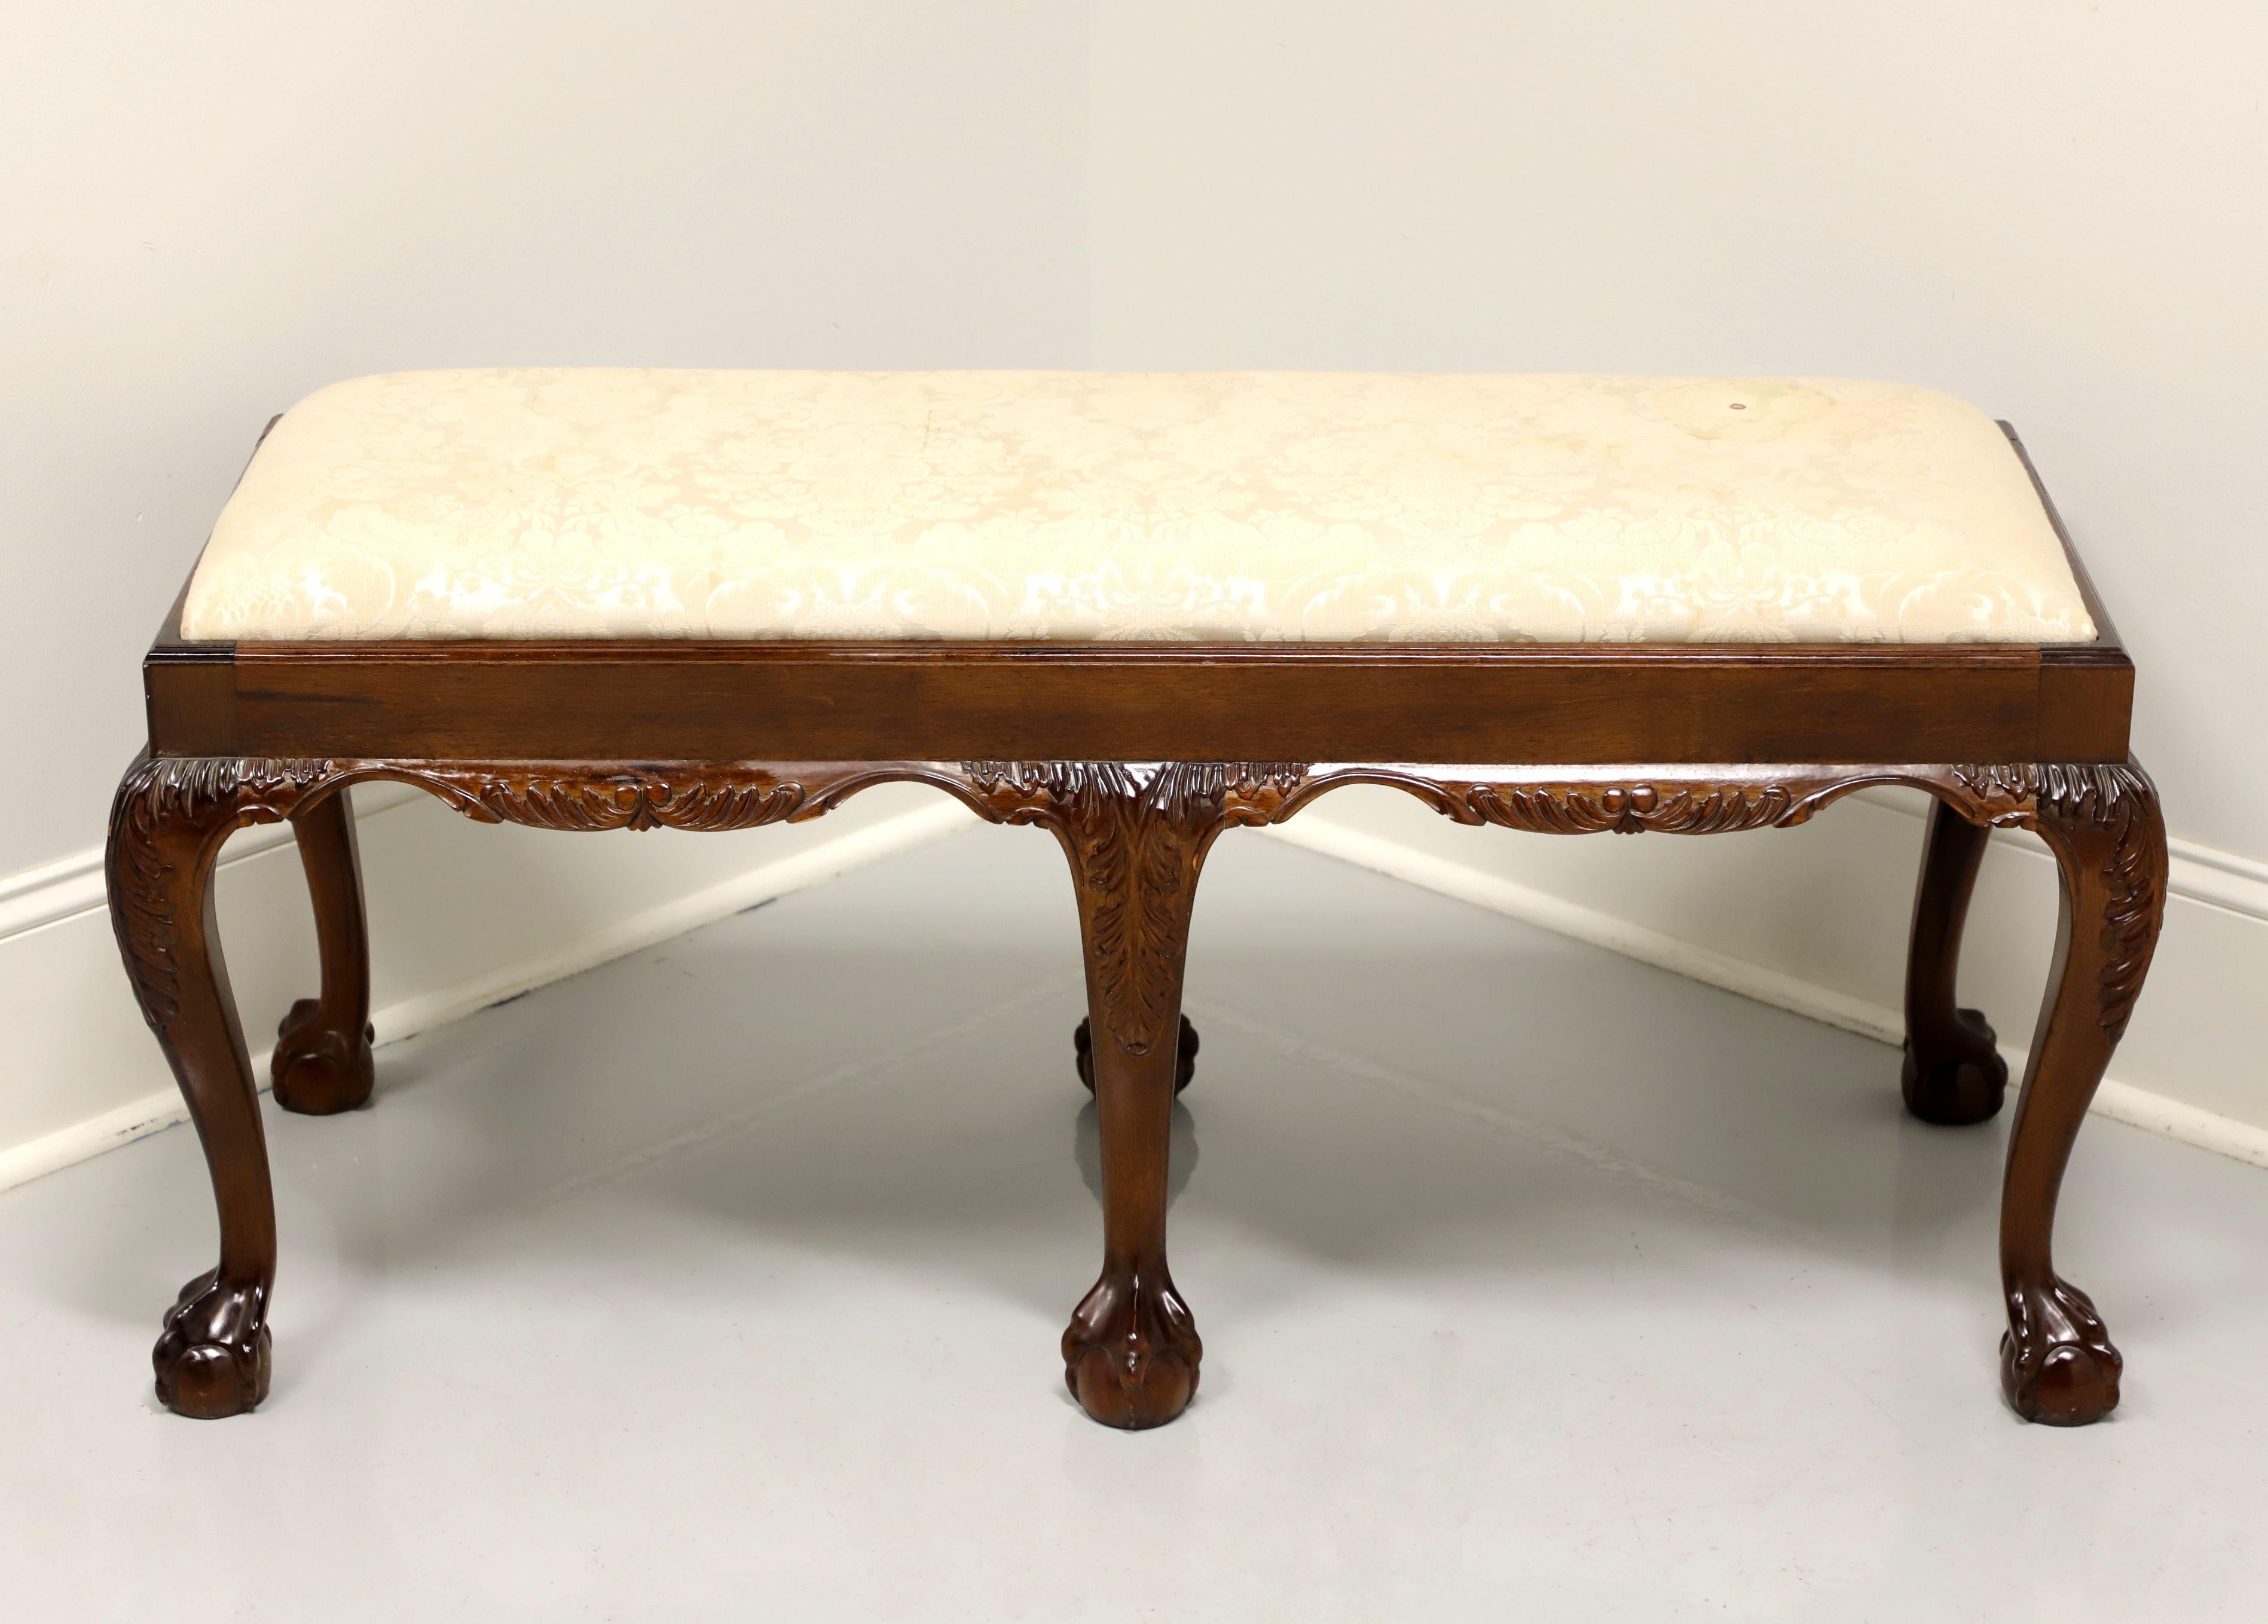 A Chippendale style bench, unbranded, similar quality to Hickory chair. Solid mahogany with carved apron & knees and ball in claw feet. Upholstered seat in a neutral cream brocade fabric. Made in the USA, in the late 20th Century.

Measures: 44 W